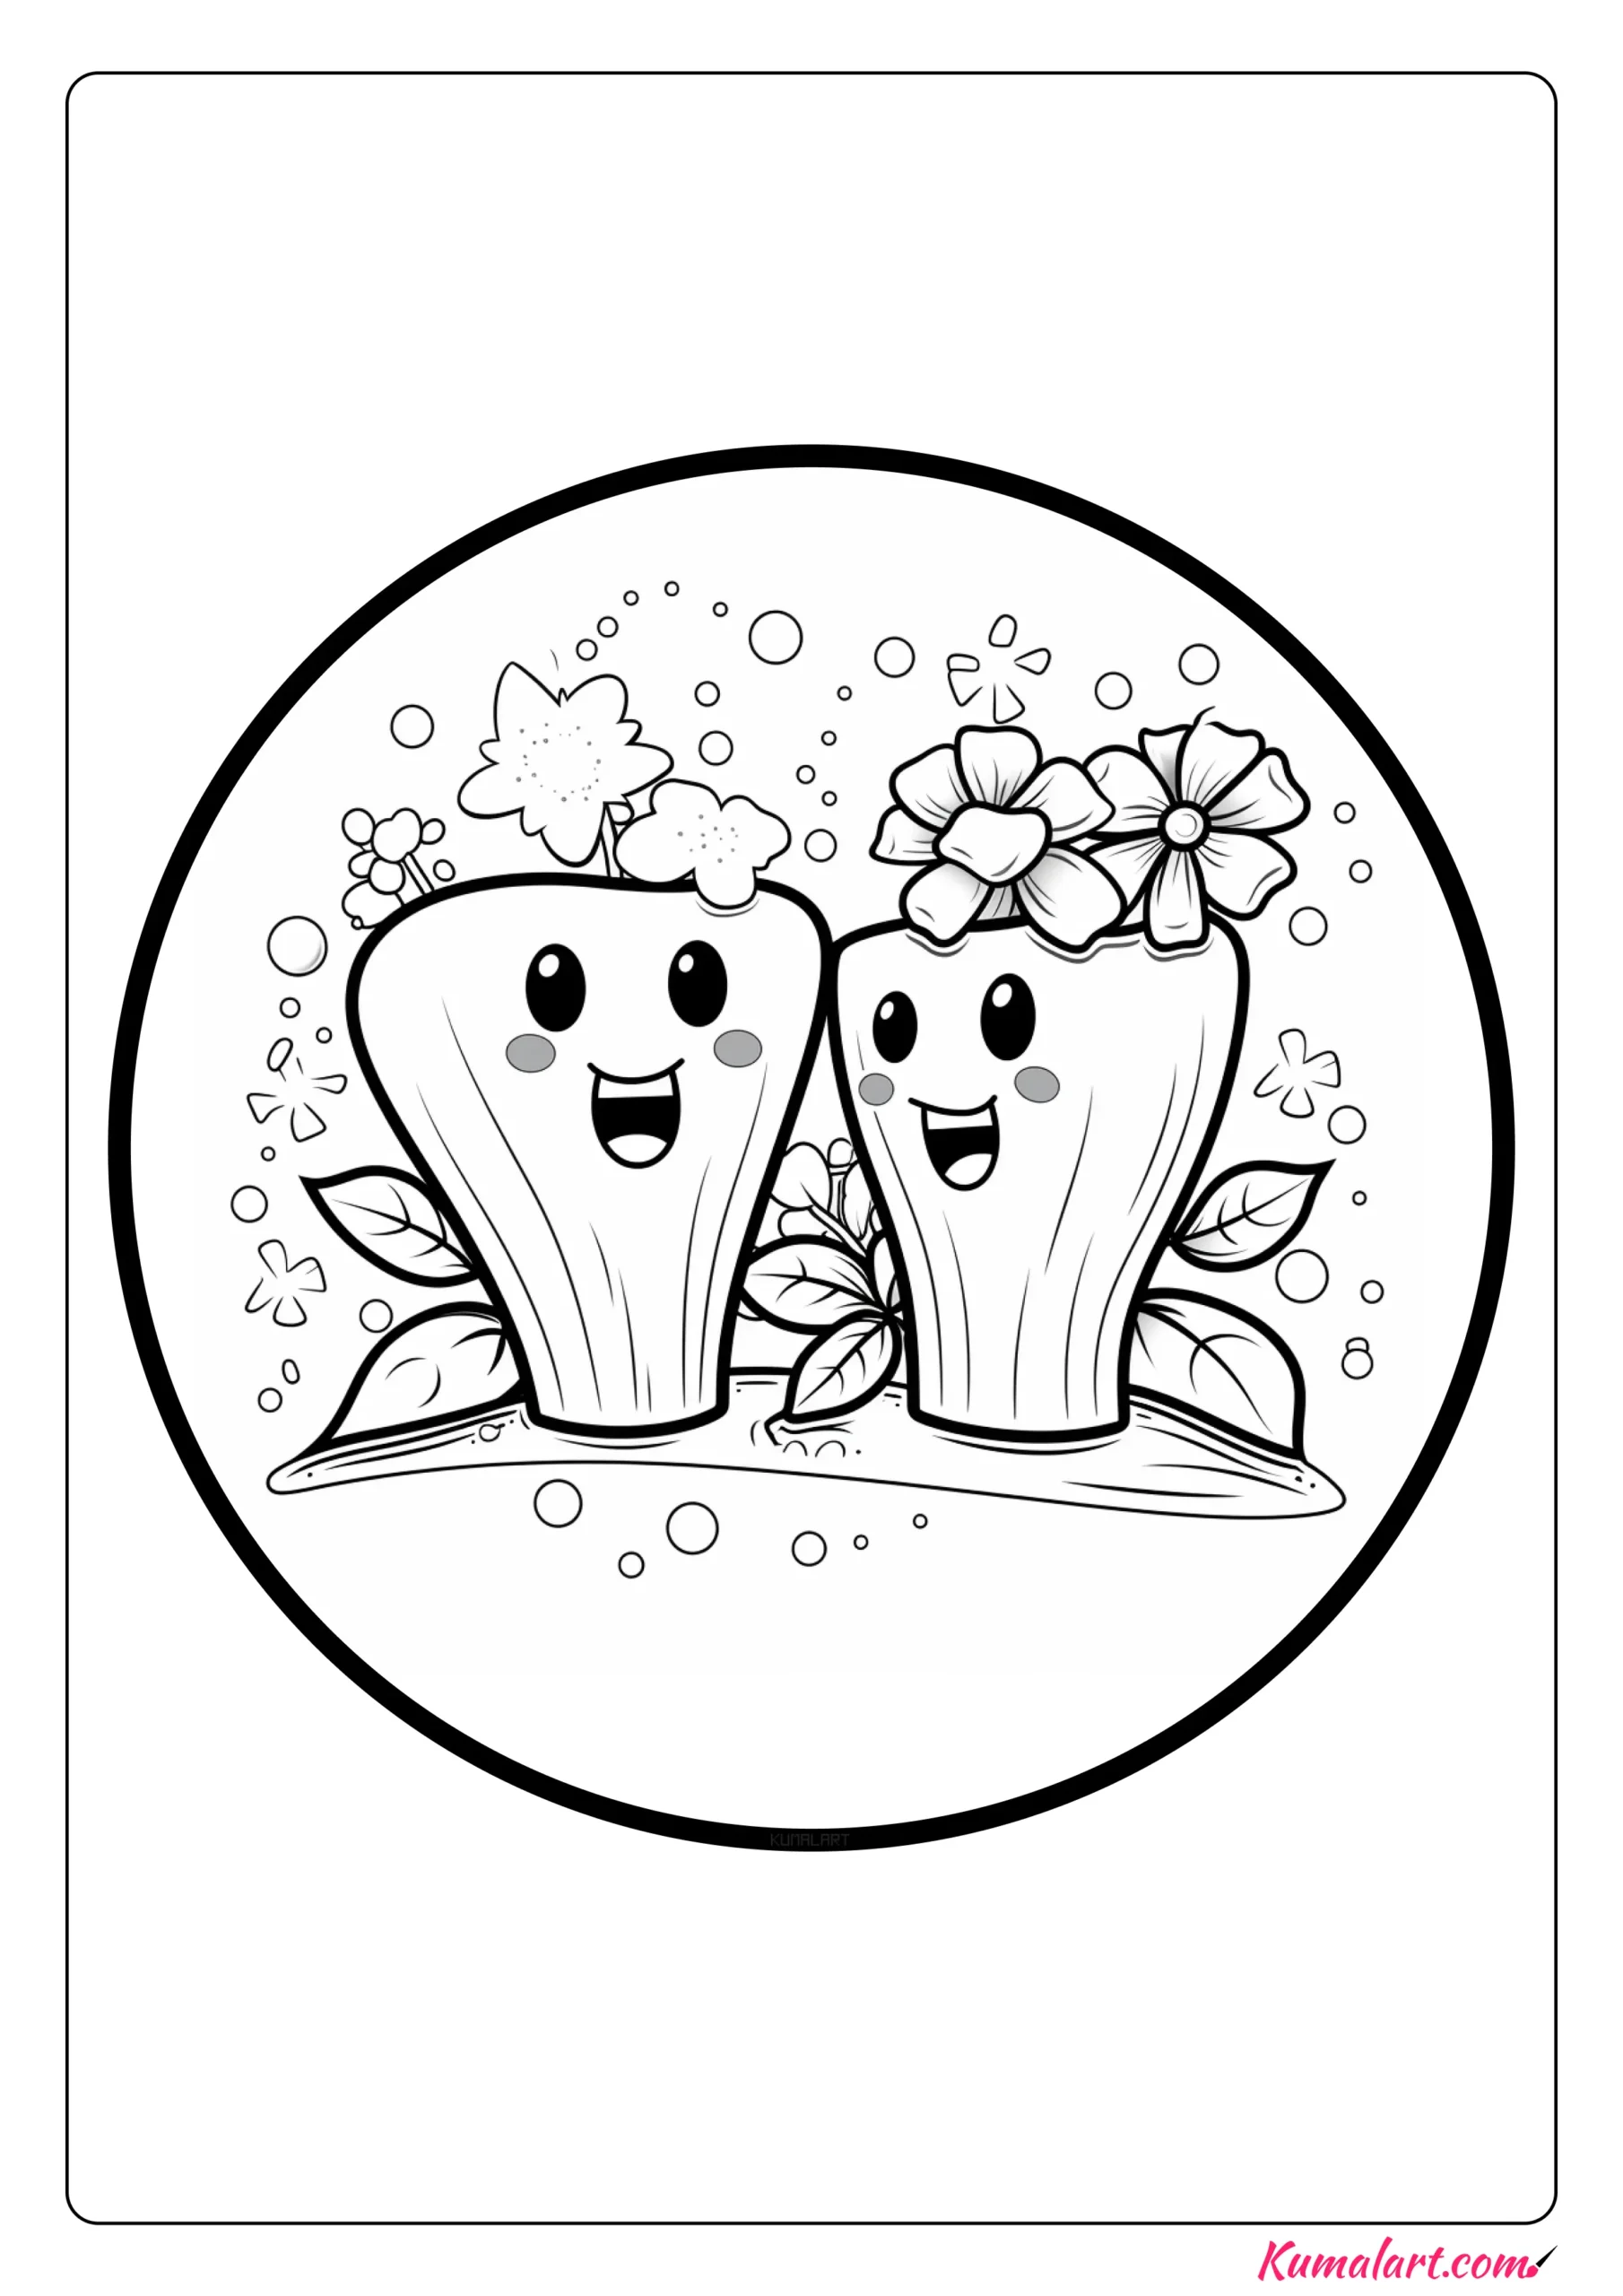 Charming Tooth Brushing Coloring Page